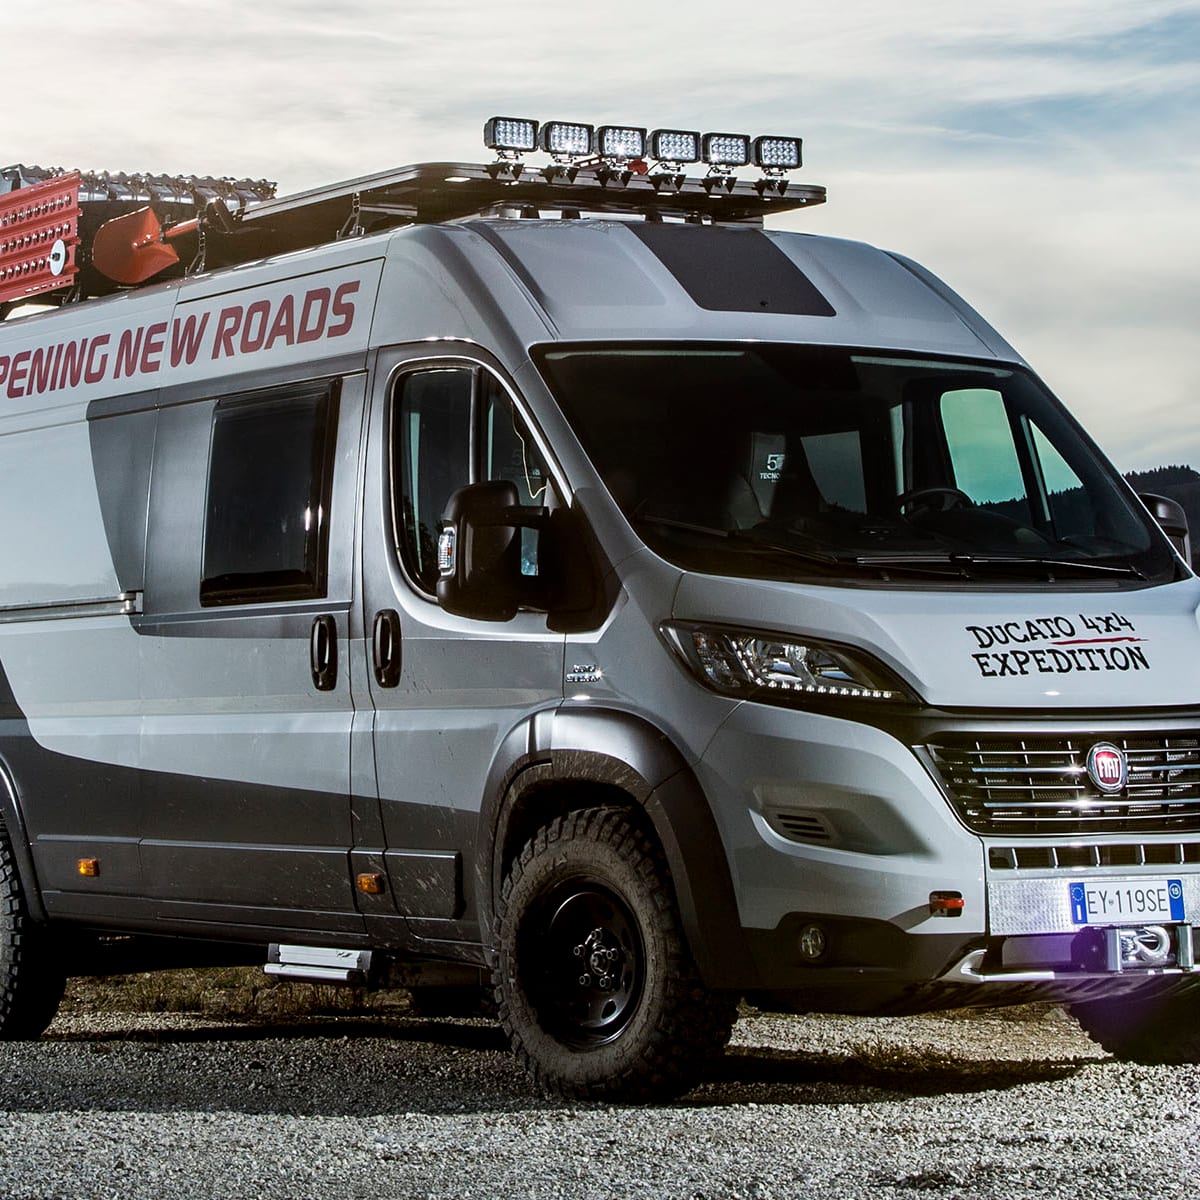 Fiat Ducato 4x4 Expedition Concept Unveiled Caradvice